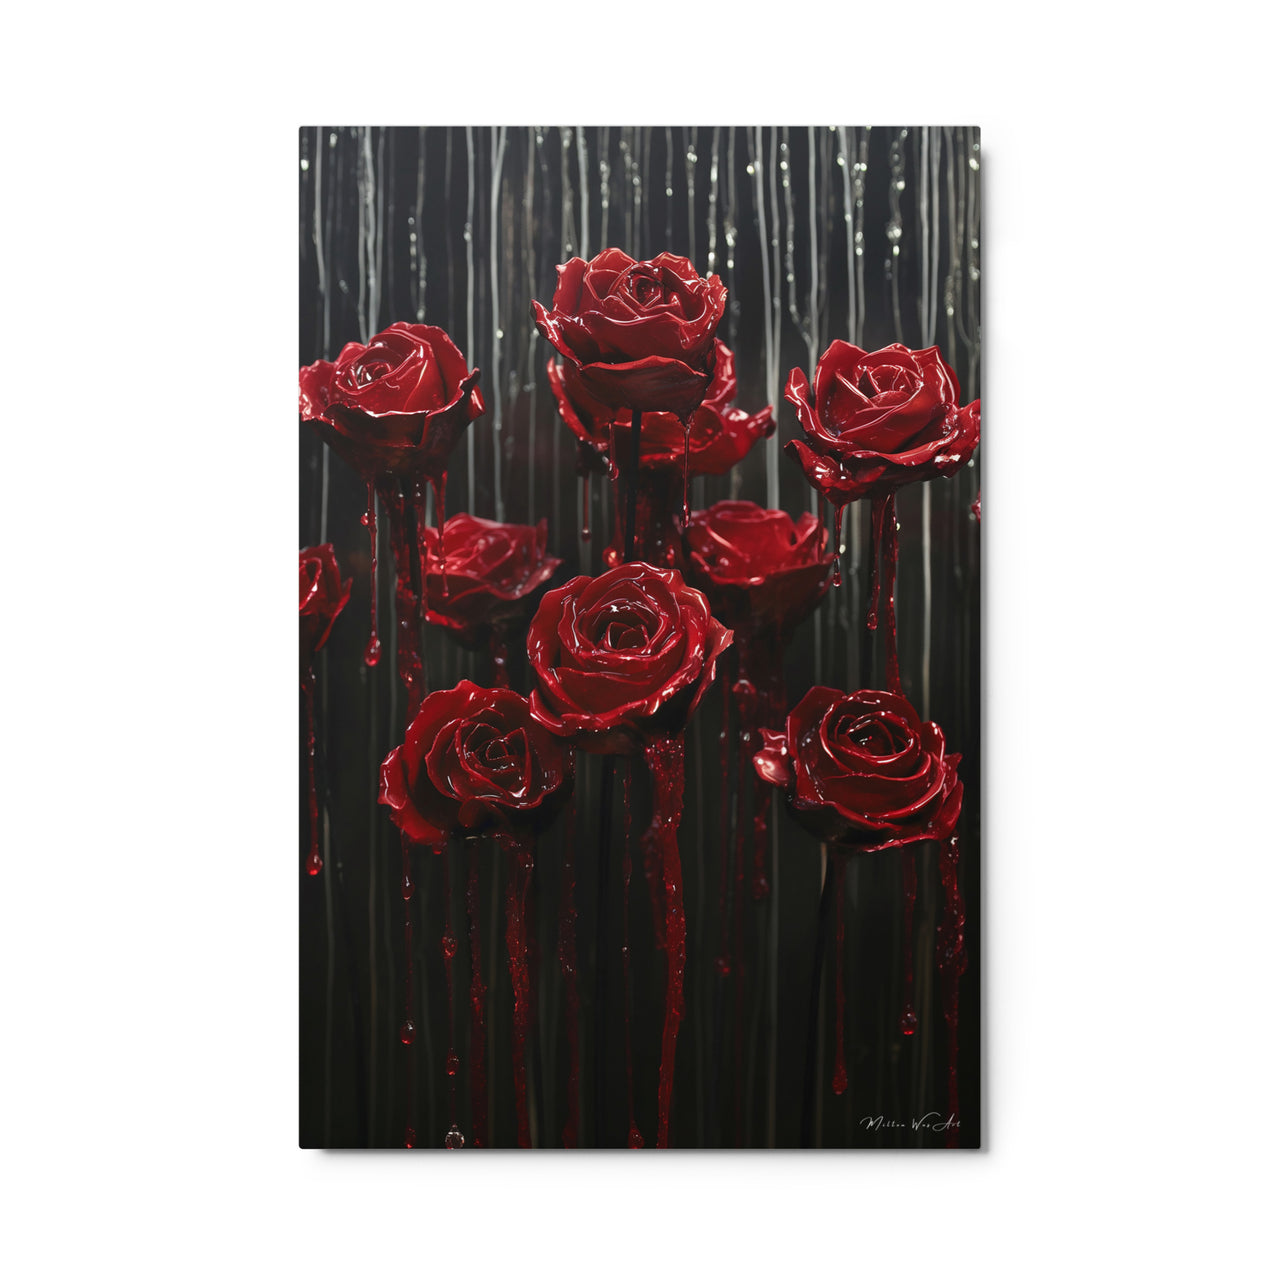 Close-up of vibrant red metallic roses with glossy drips on a dark striped background, metal print by Milton Wes Art.